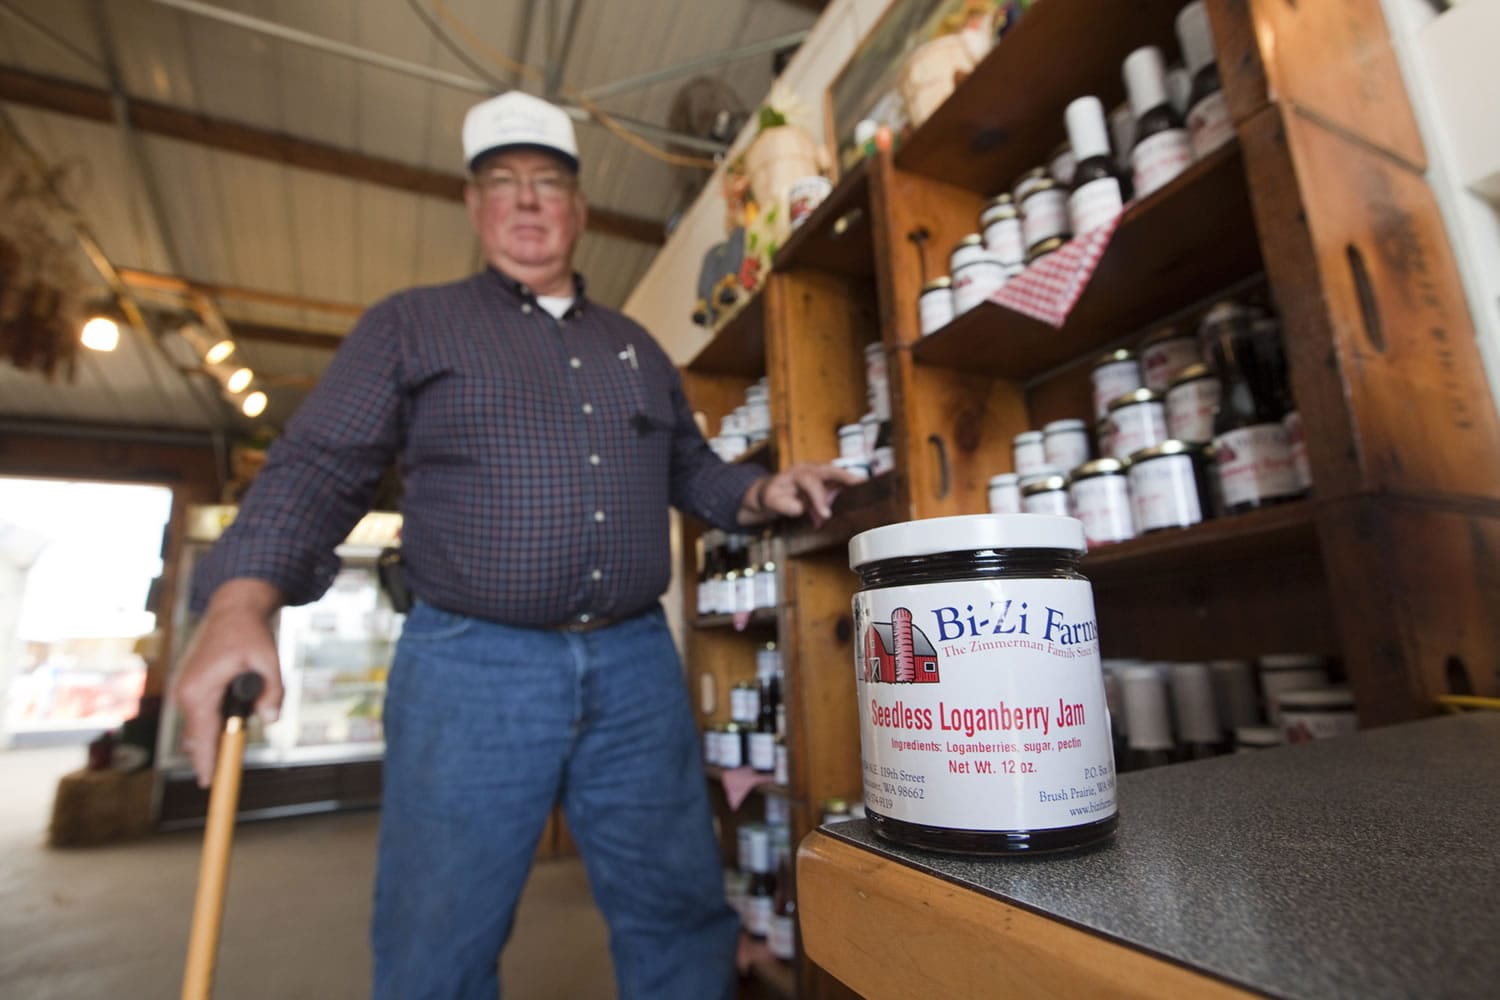 Bill Zimmerman stands next to a display of jams and syrups at Bi-Zi Farms near Vancouver on Monday.